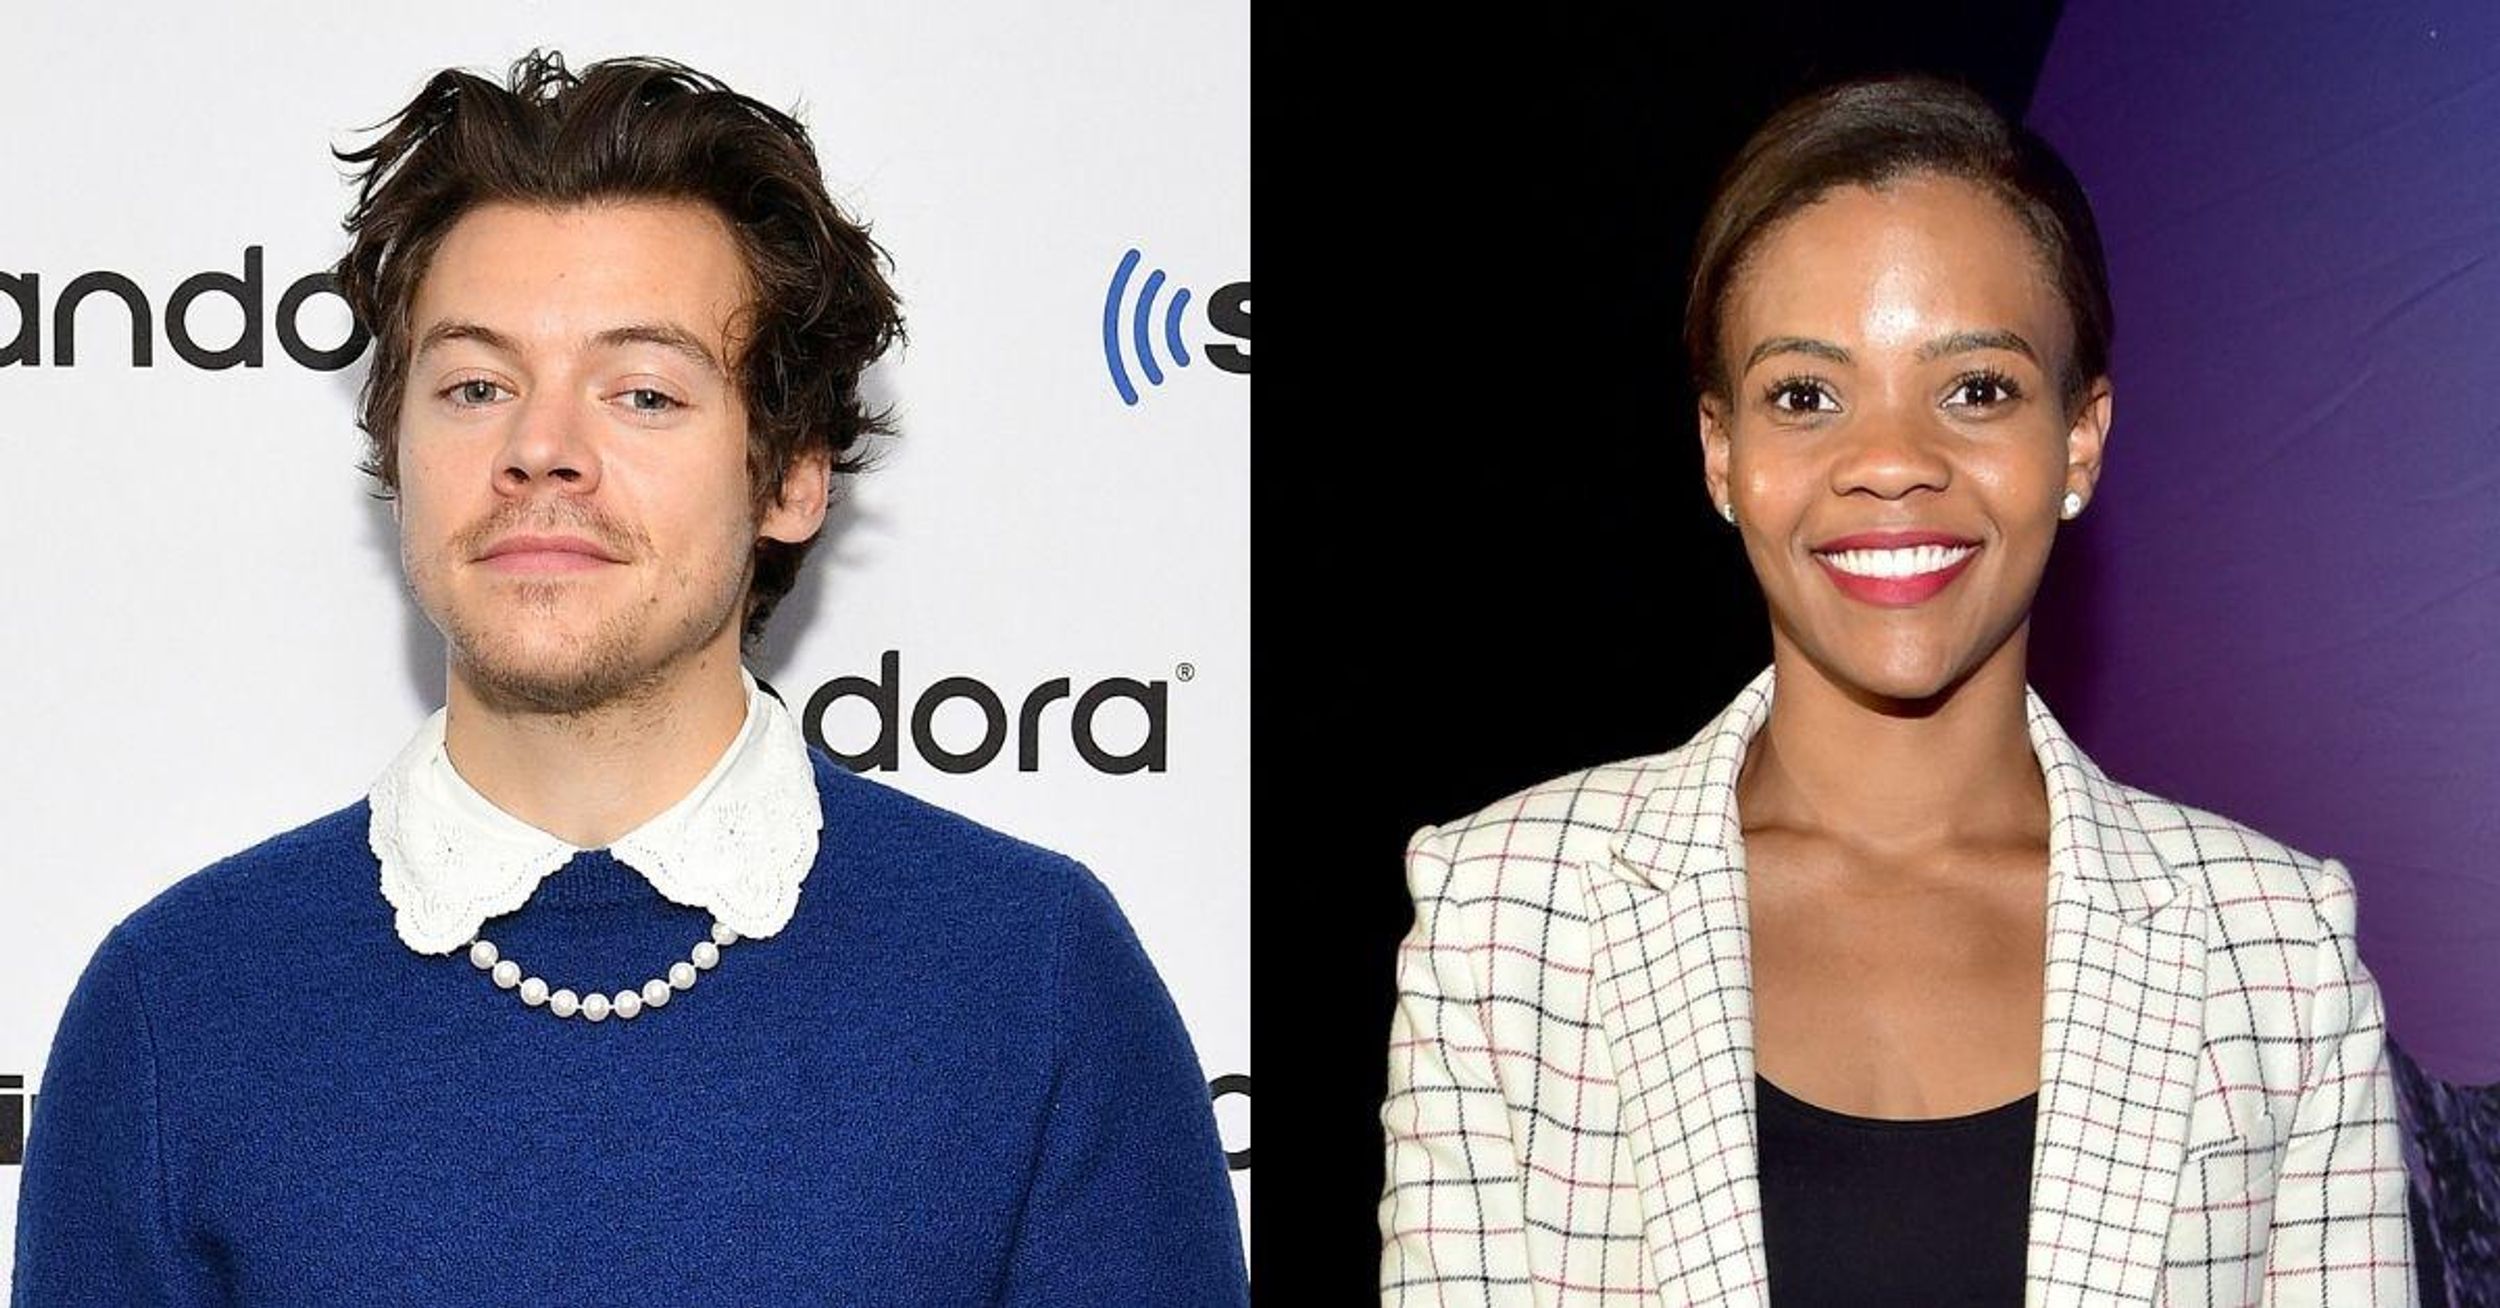 Harry Styles Perfectly Claps Back After Candace Owens Slammed Him For Not Being 'Manly' Enough